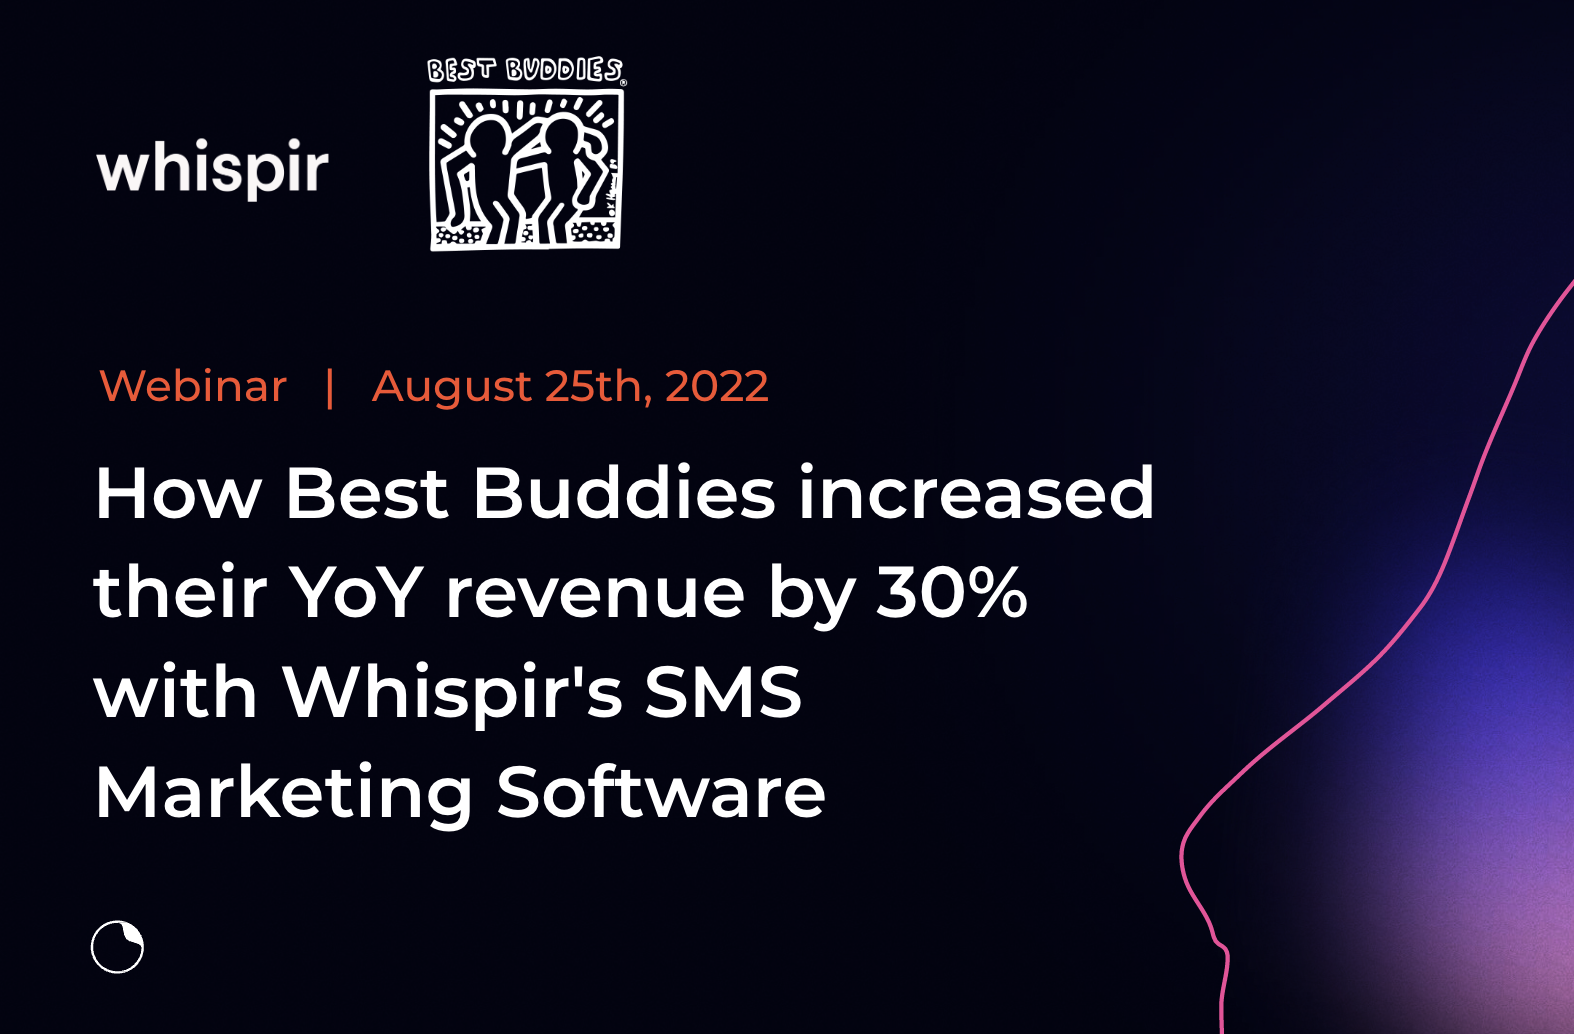 Image of Webinar: How Best Buddies increased YoY revenue by 30% with SMS marketing